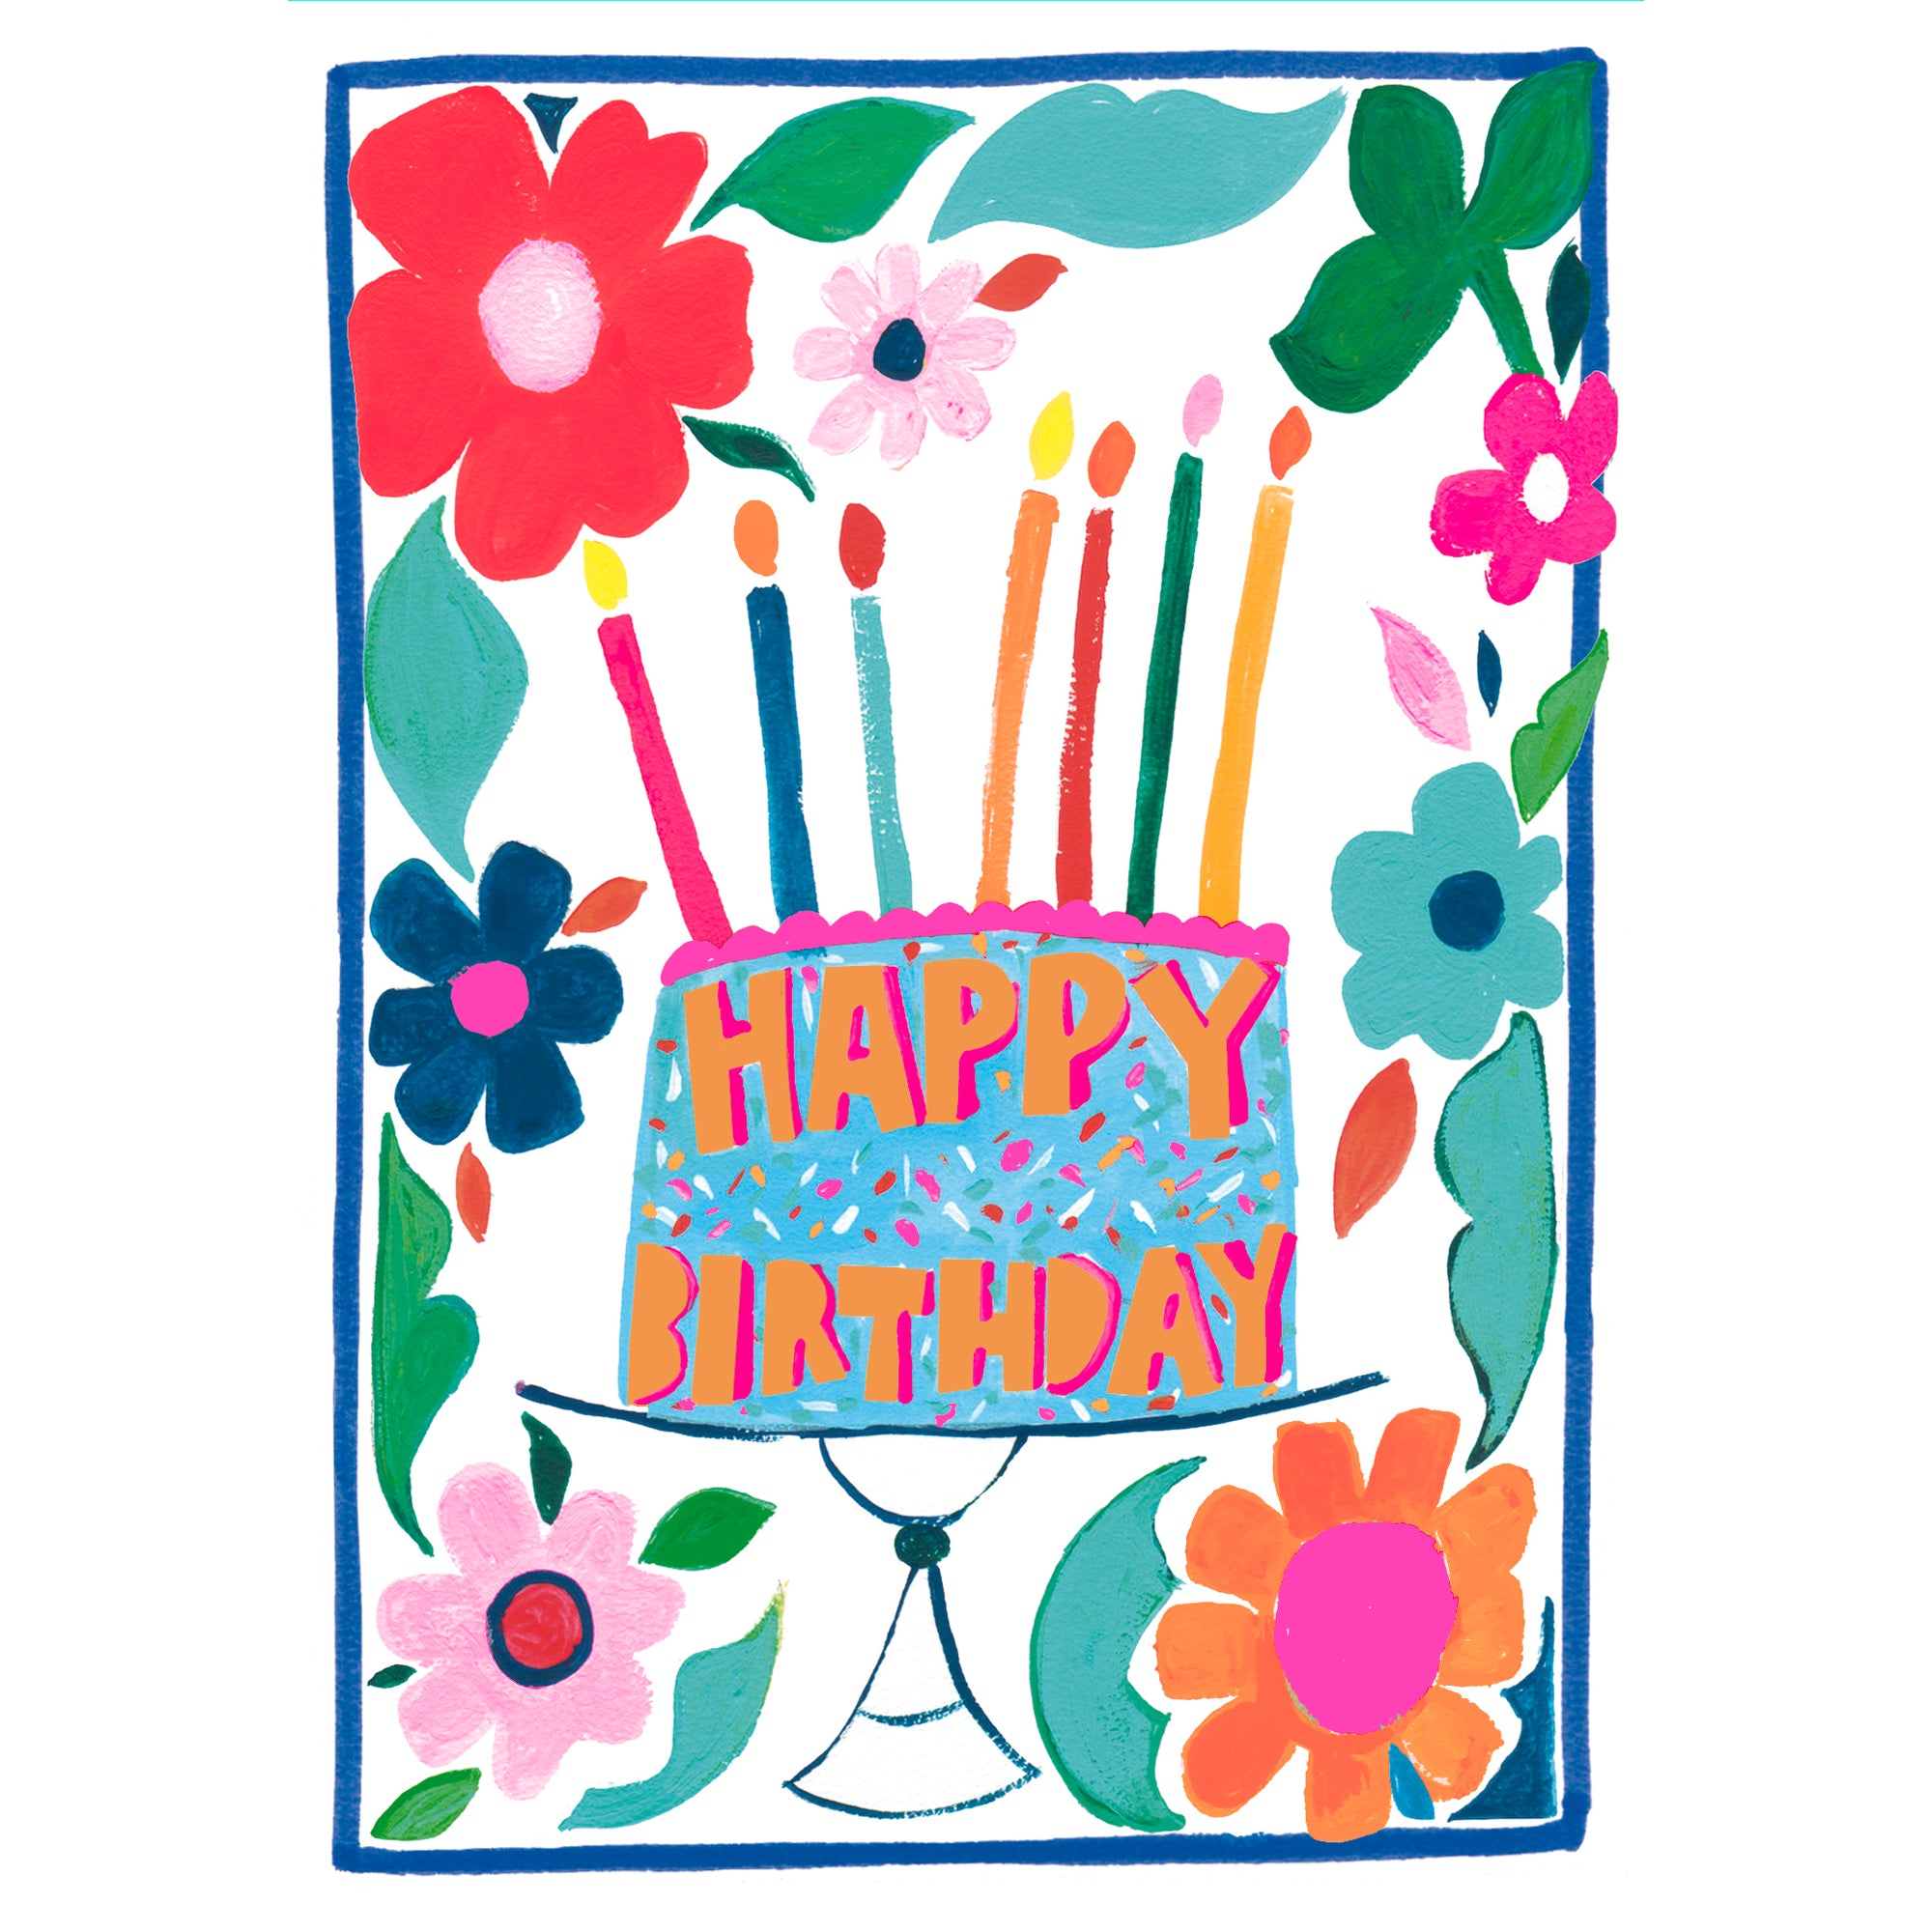 Punchy Florals Cake Centrepiece Birthday Card from Penny Black